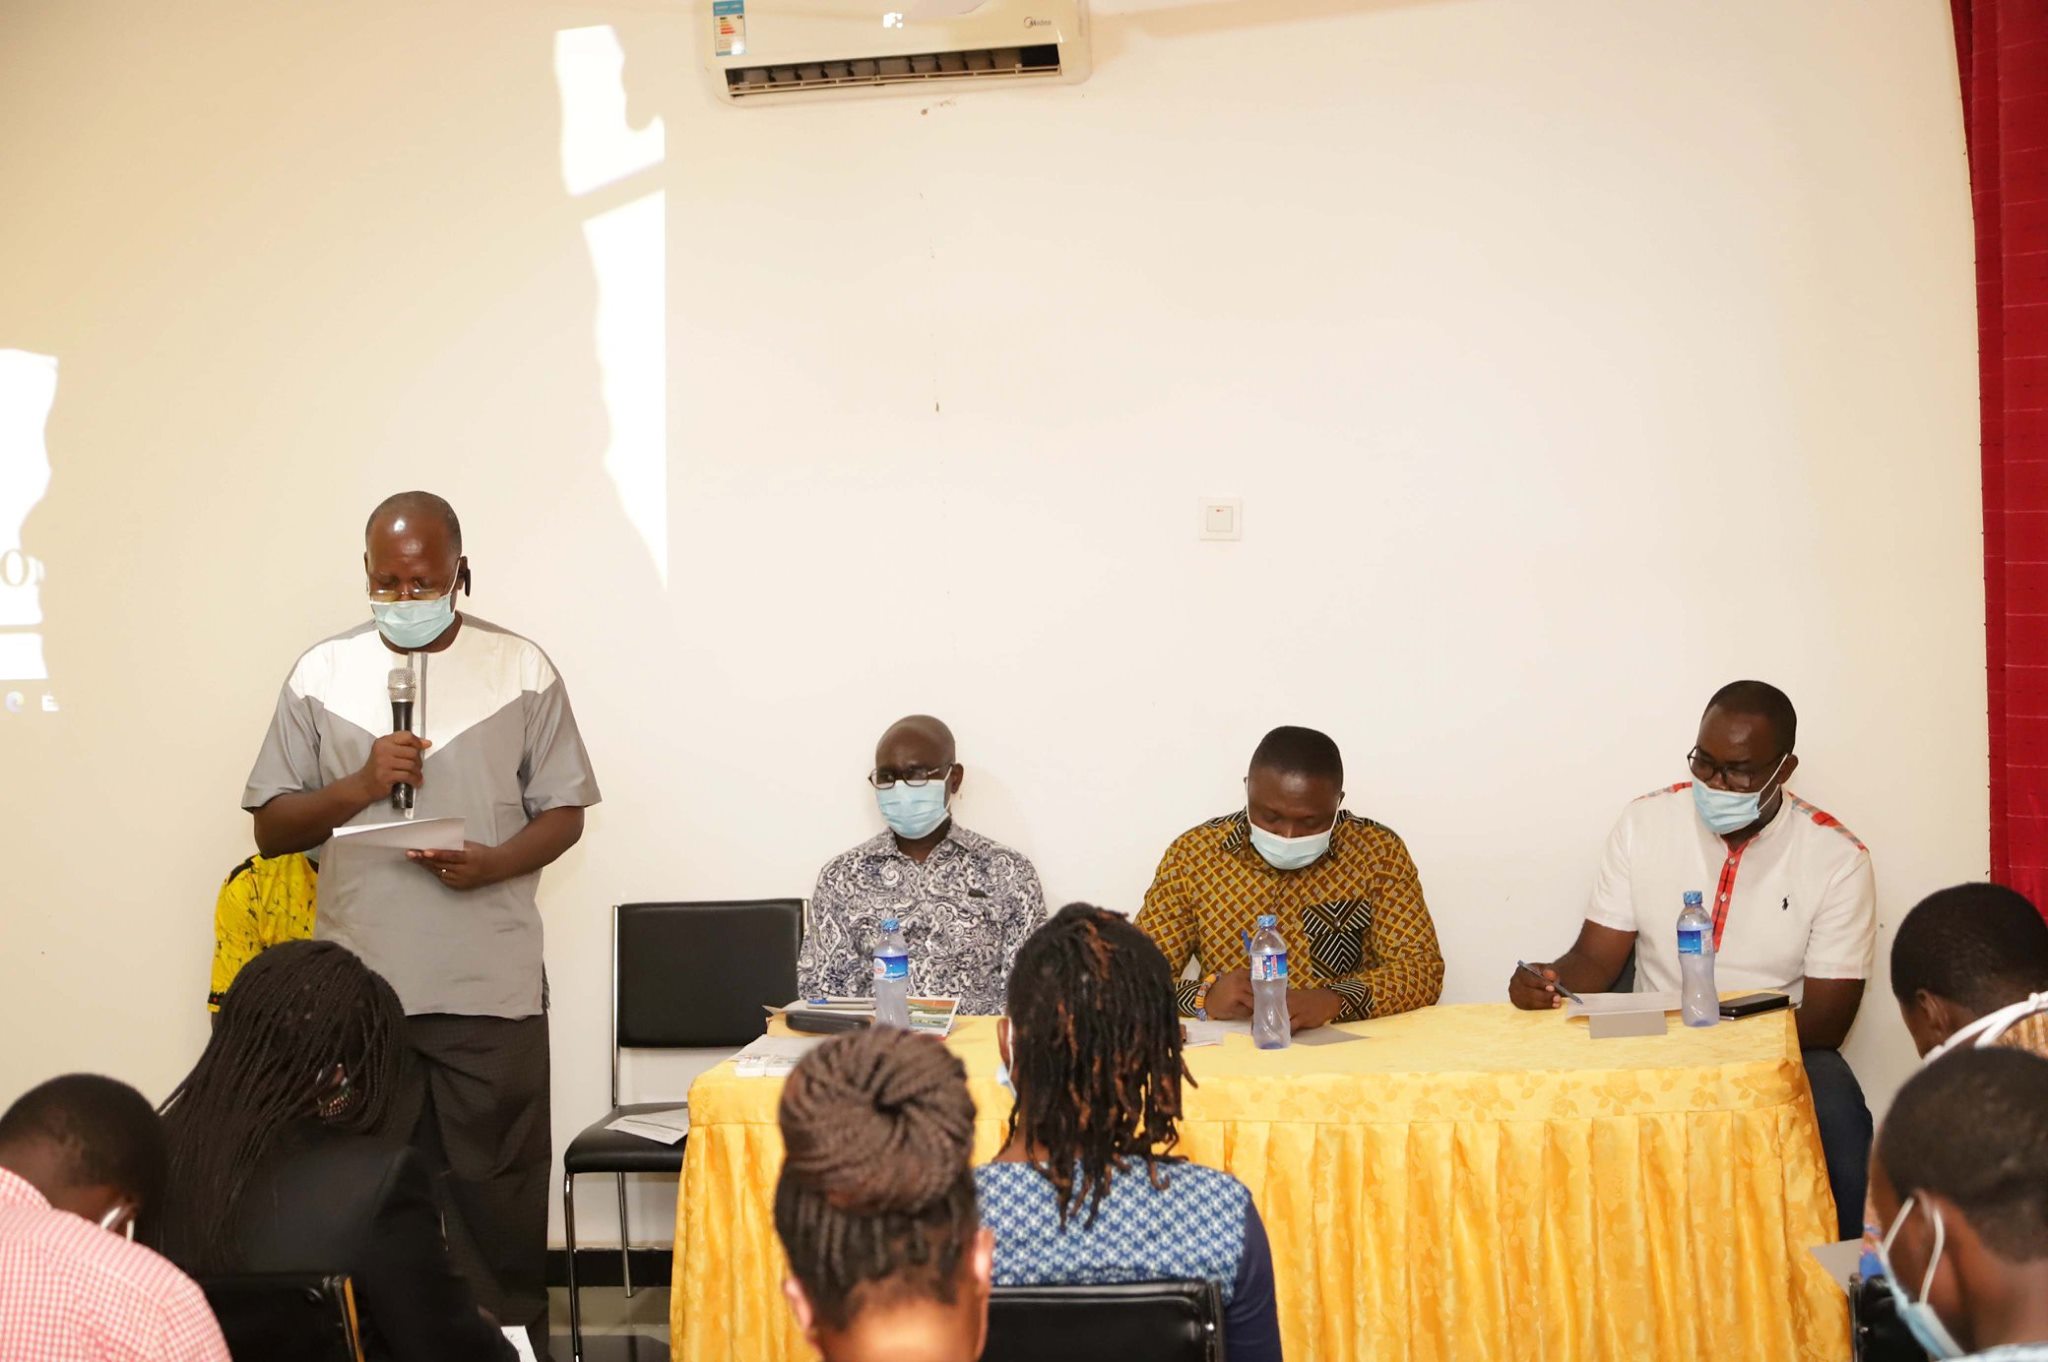 A one-day orientation for staff of the Upper East Regional and District directorates of the National Youth Authority